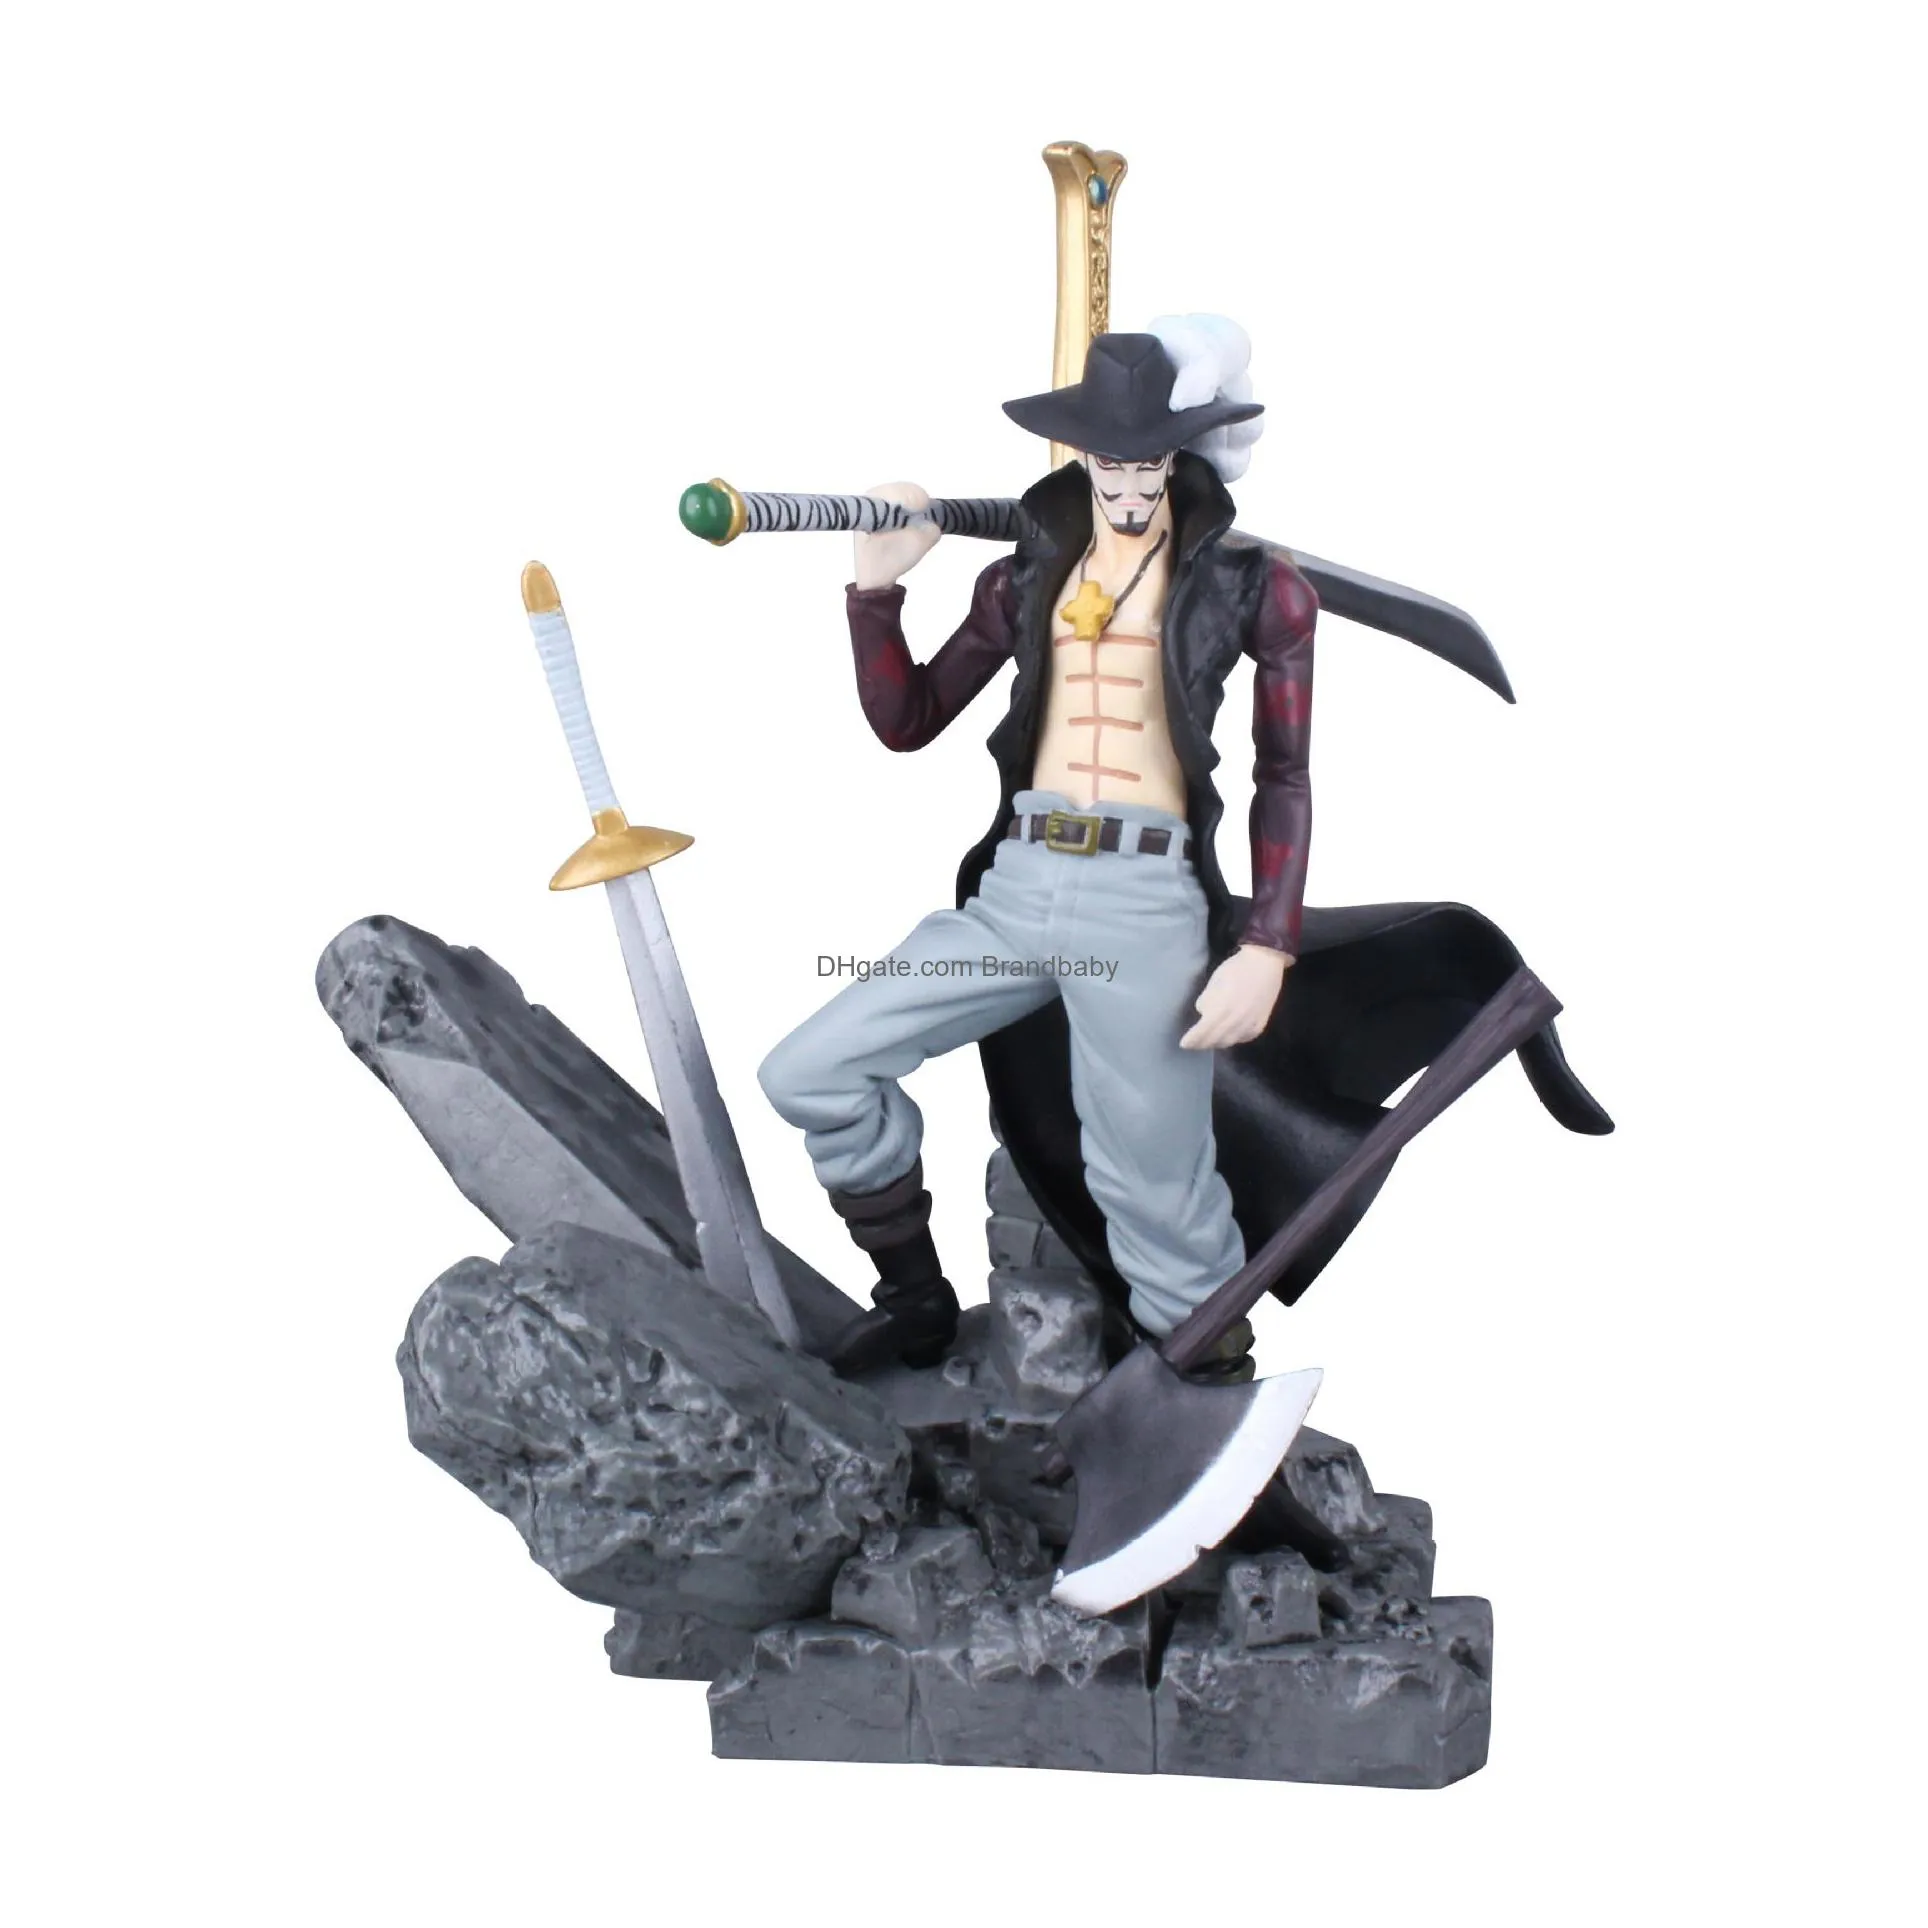 decompression toy 16cm anime one piece dracule mihawk figurine combat ver. pvc action figure collection model toys gift for collectible